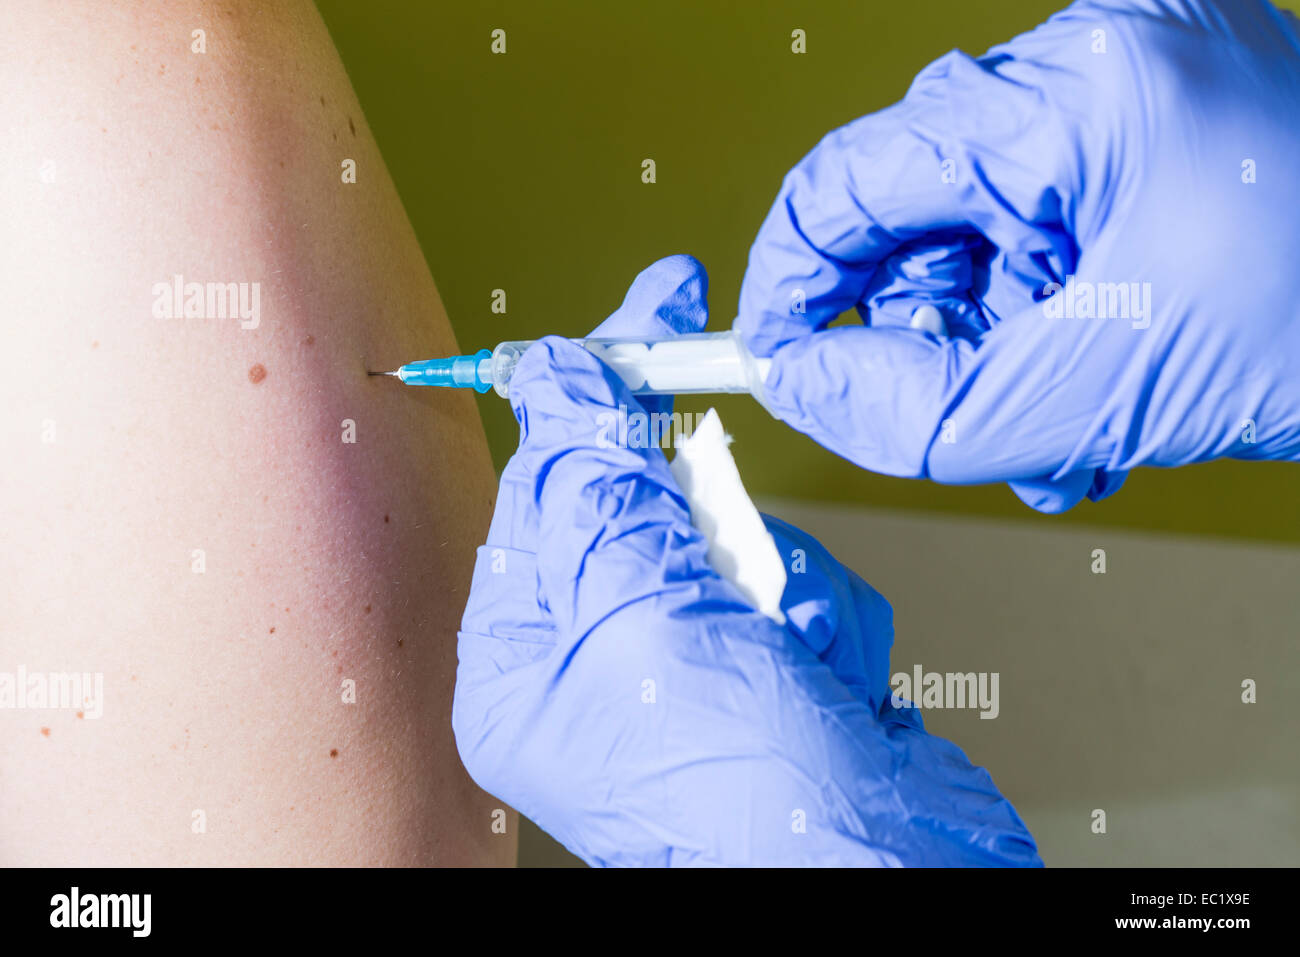 Injection of medicine into an arm, Berlin, Germany Stock Photo